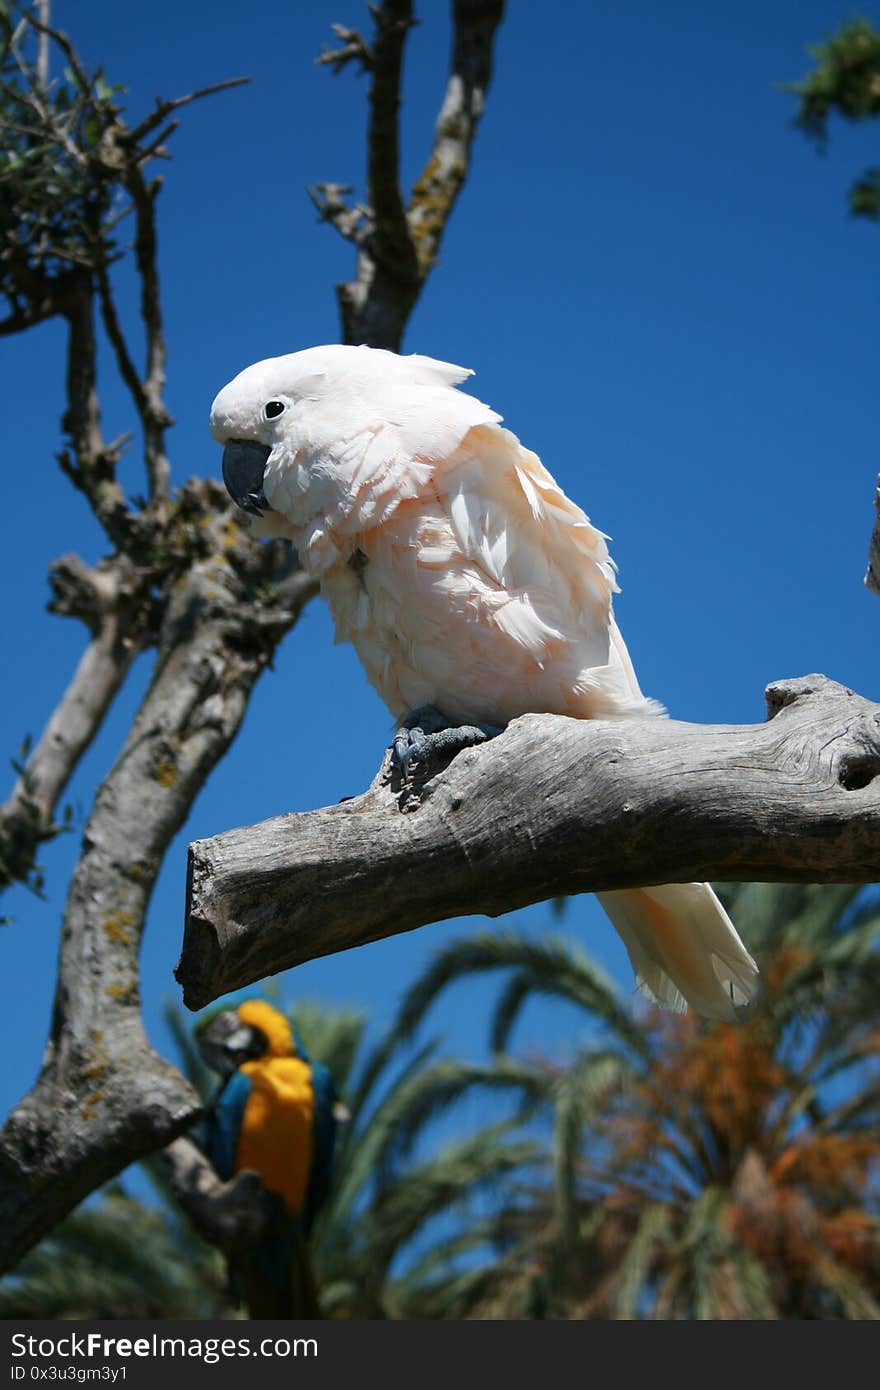 Cockatoo on a branch on a sunny day. Photo taken in August 2008